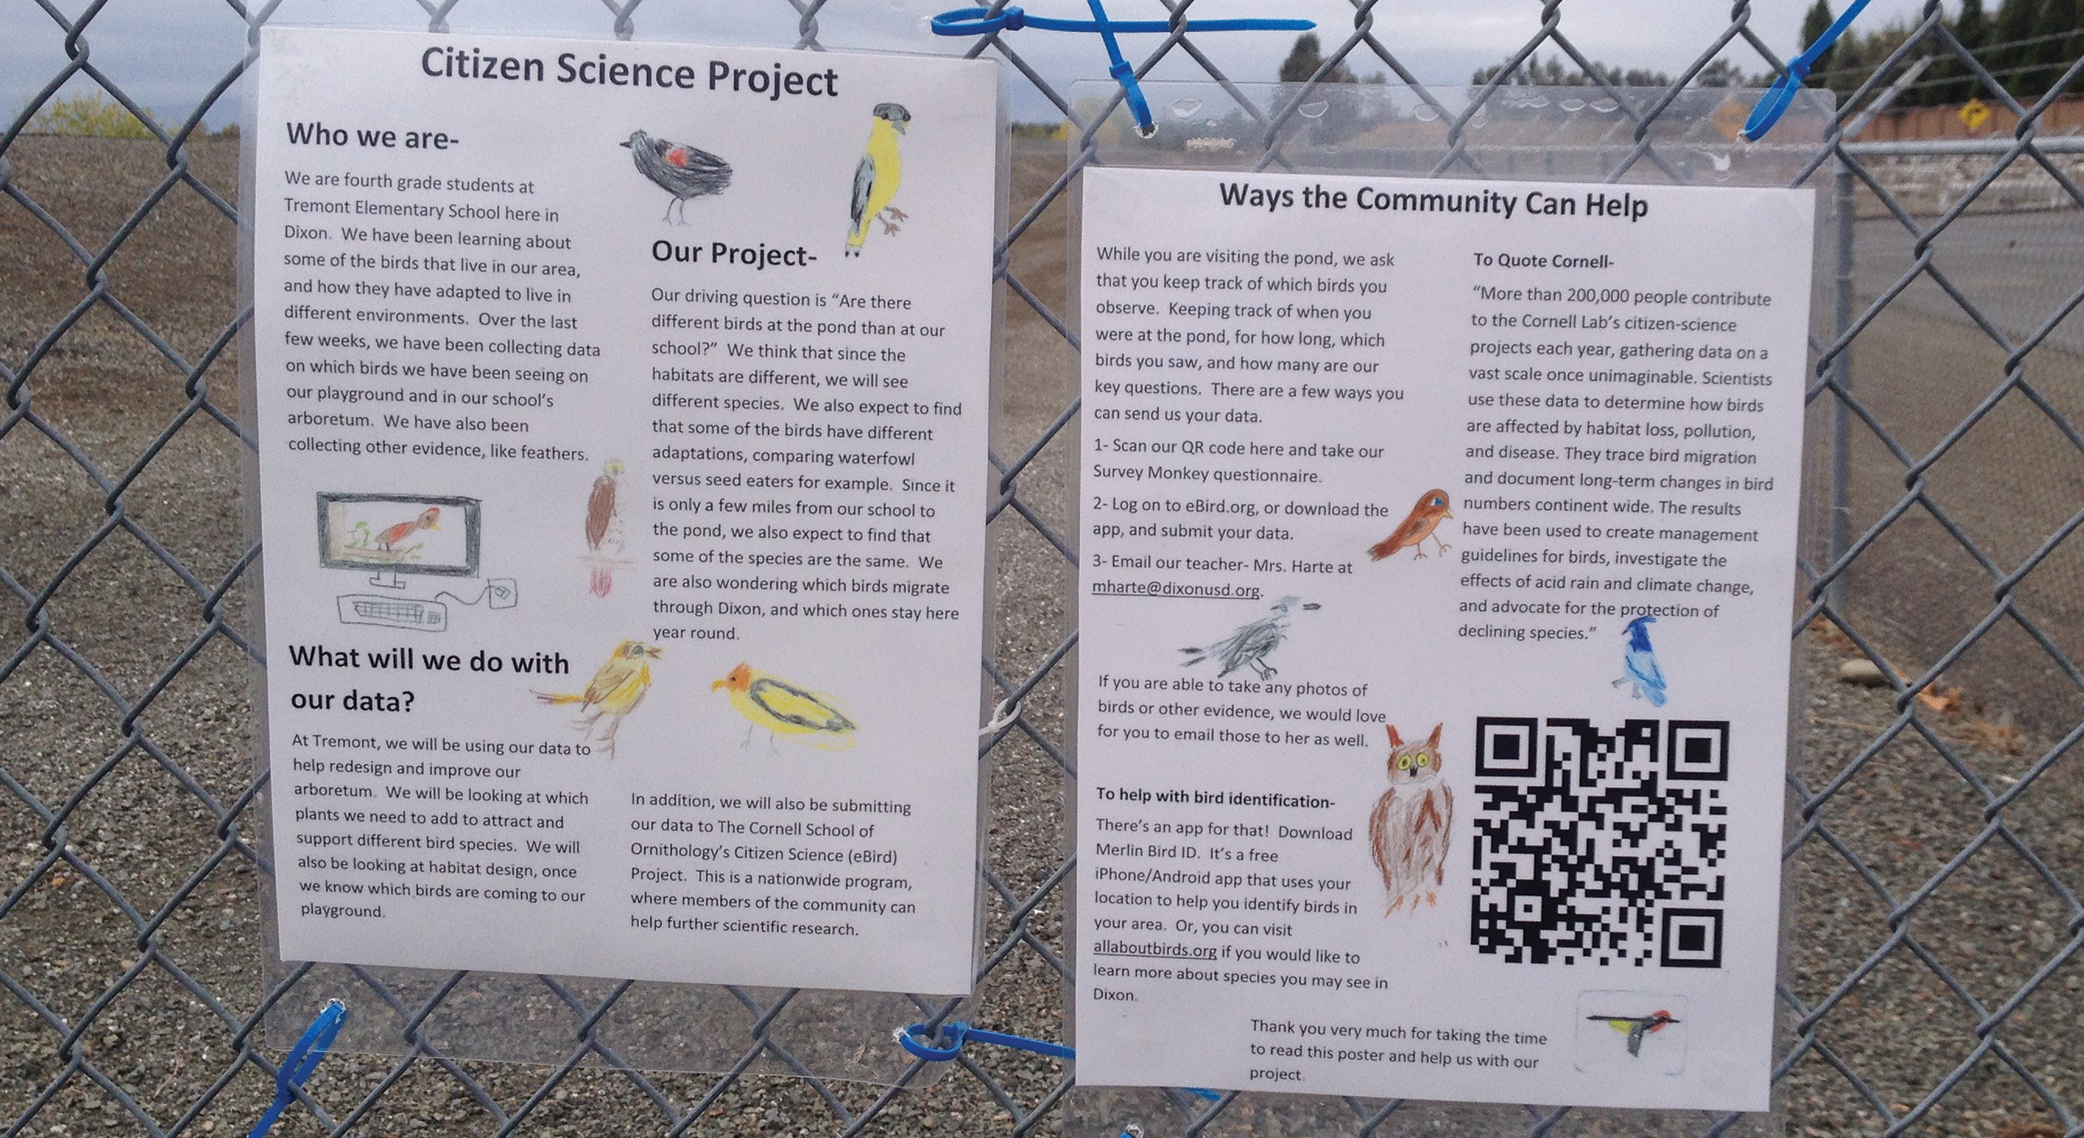 Students reached out to the community for help submitting data on bird sightings.